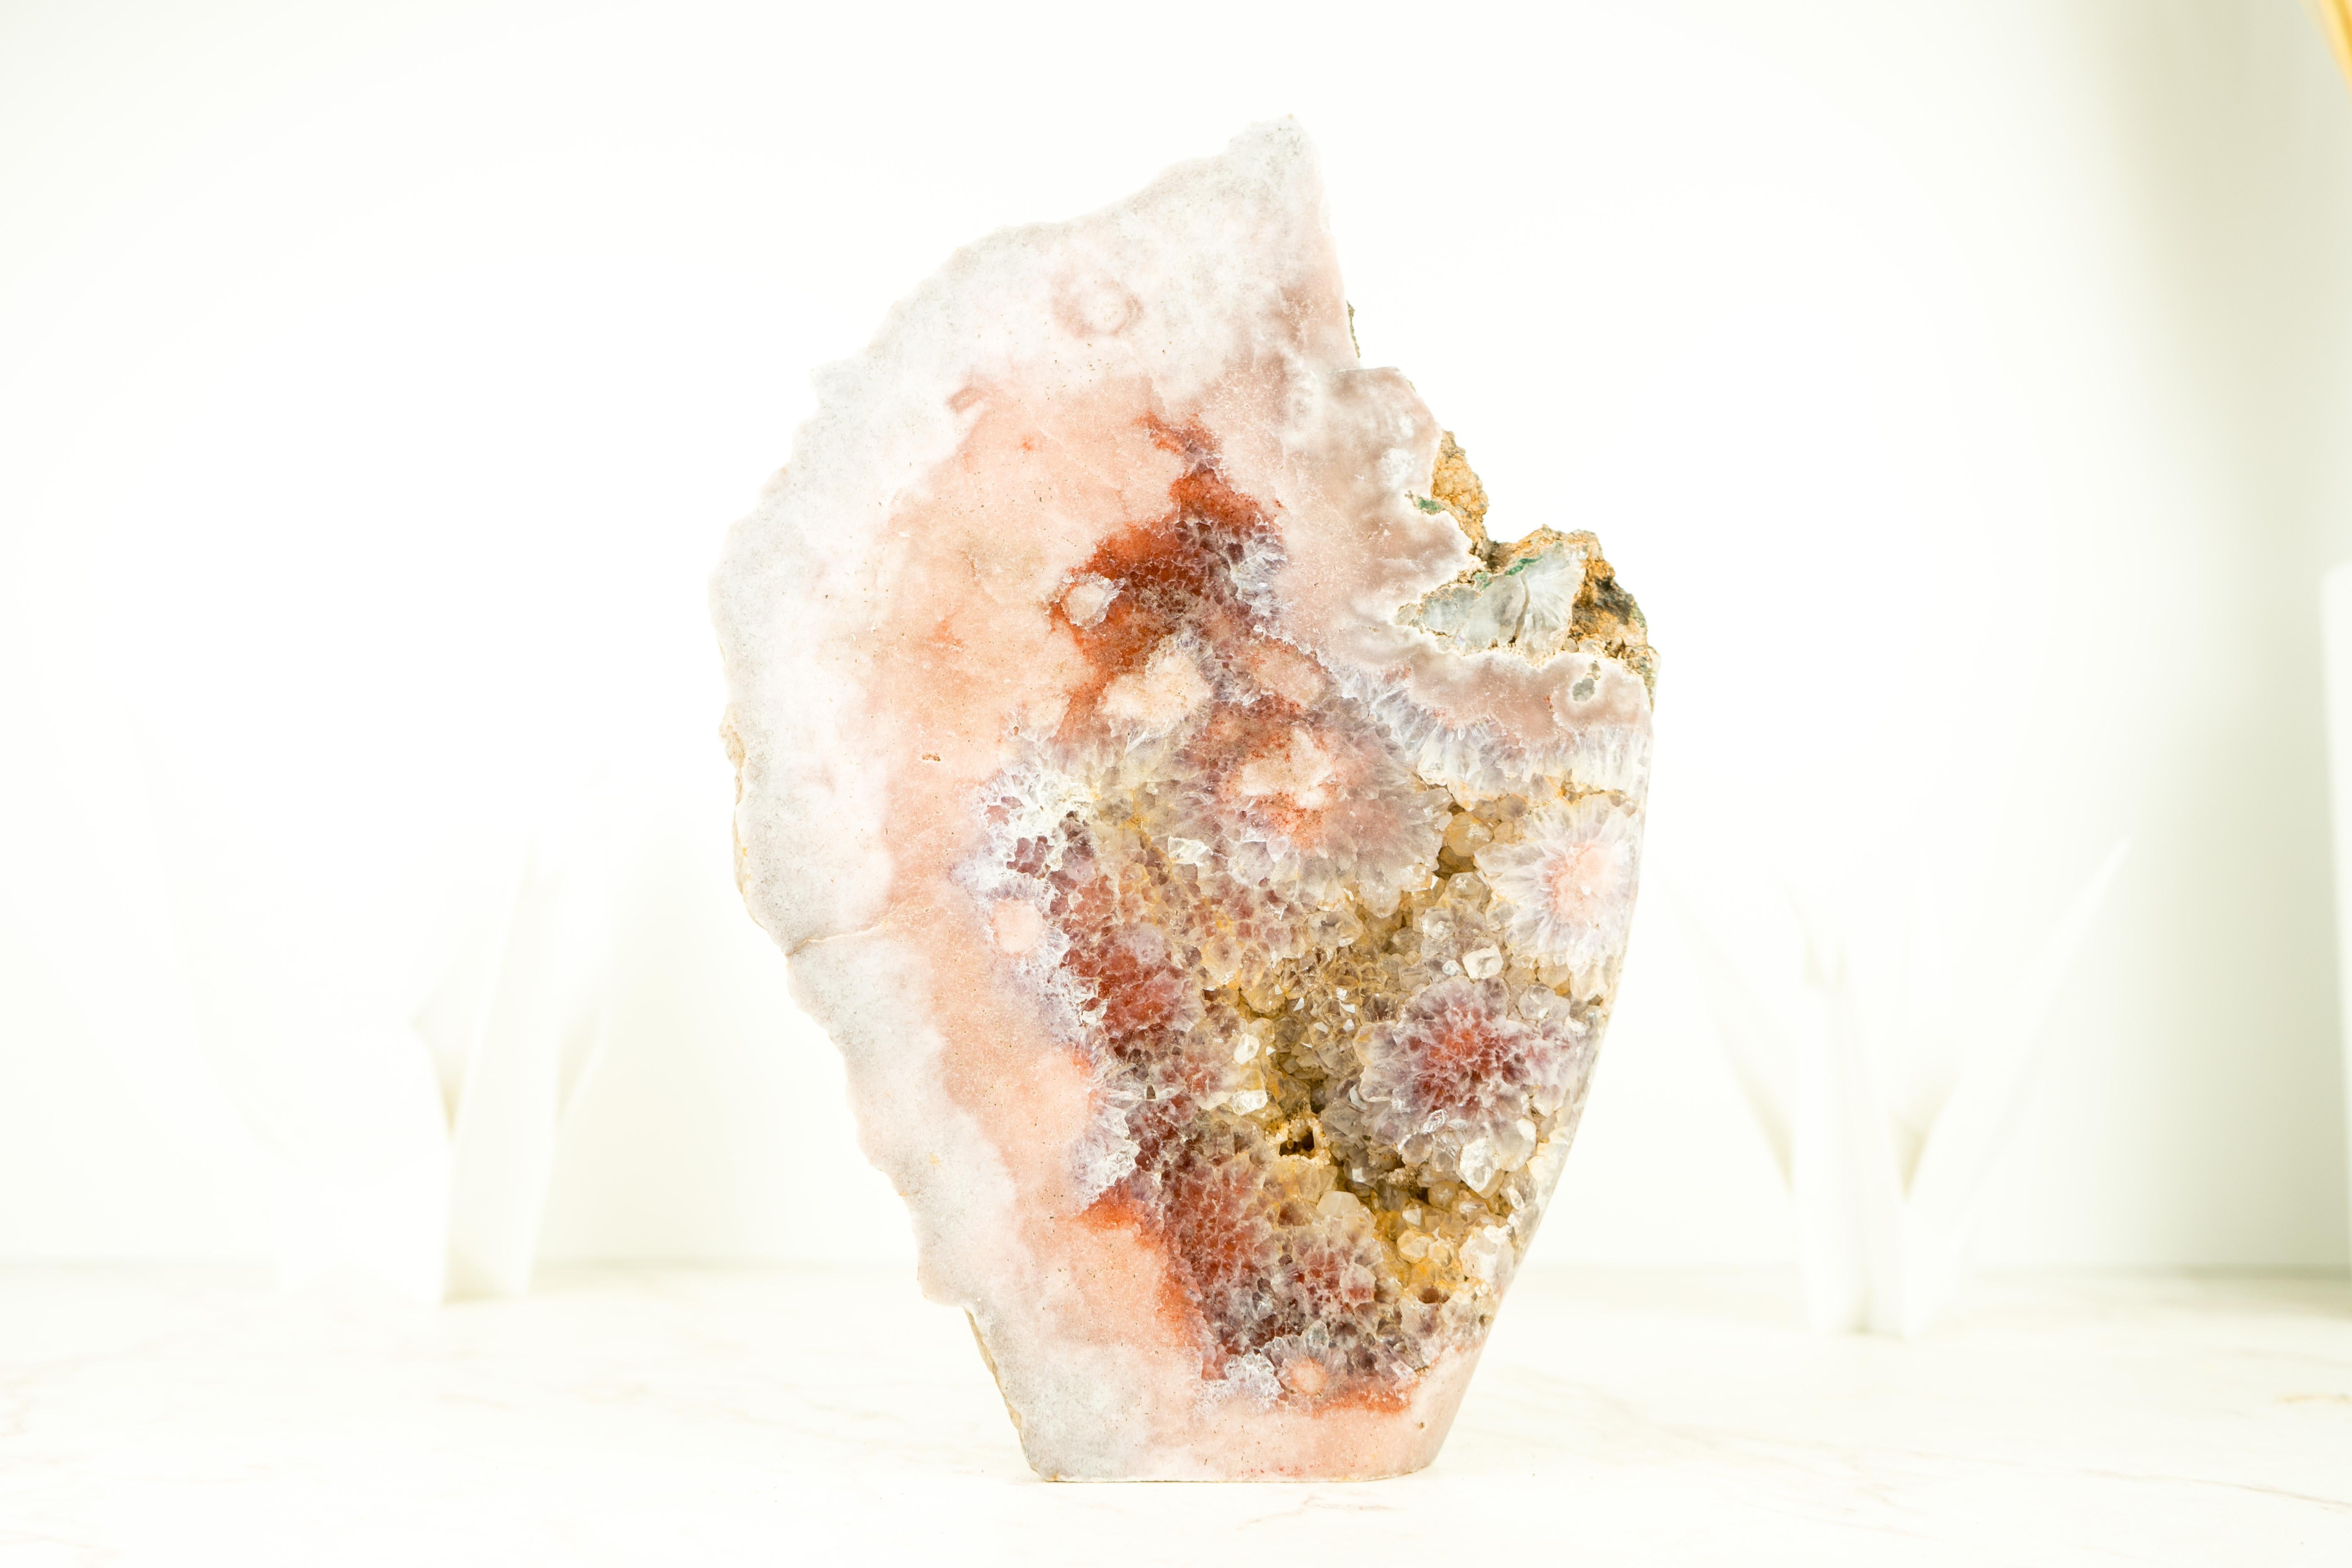 Brazilian Sculptural Rose Amethyst Geode Slab with Pink and Red Amethyst, Crystal Decor For Sale